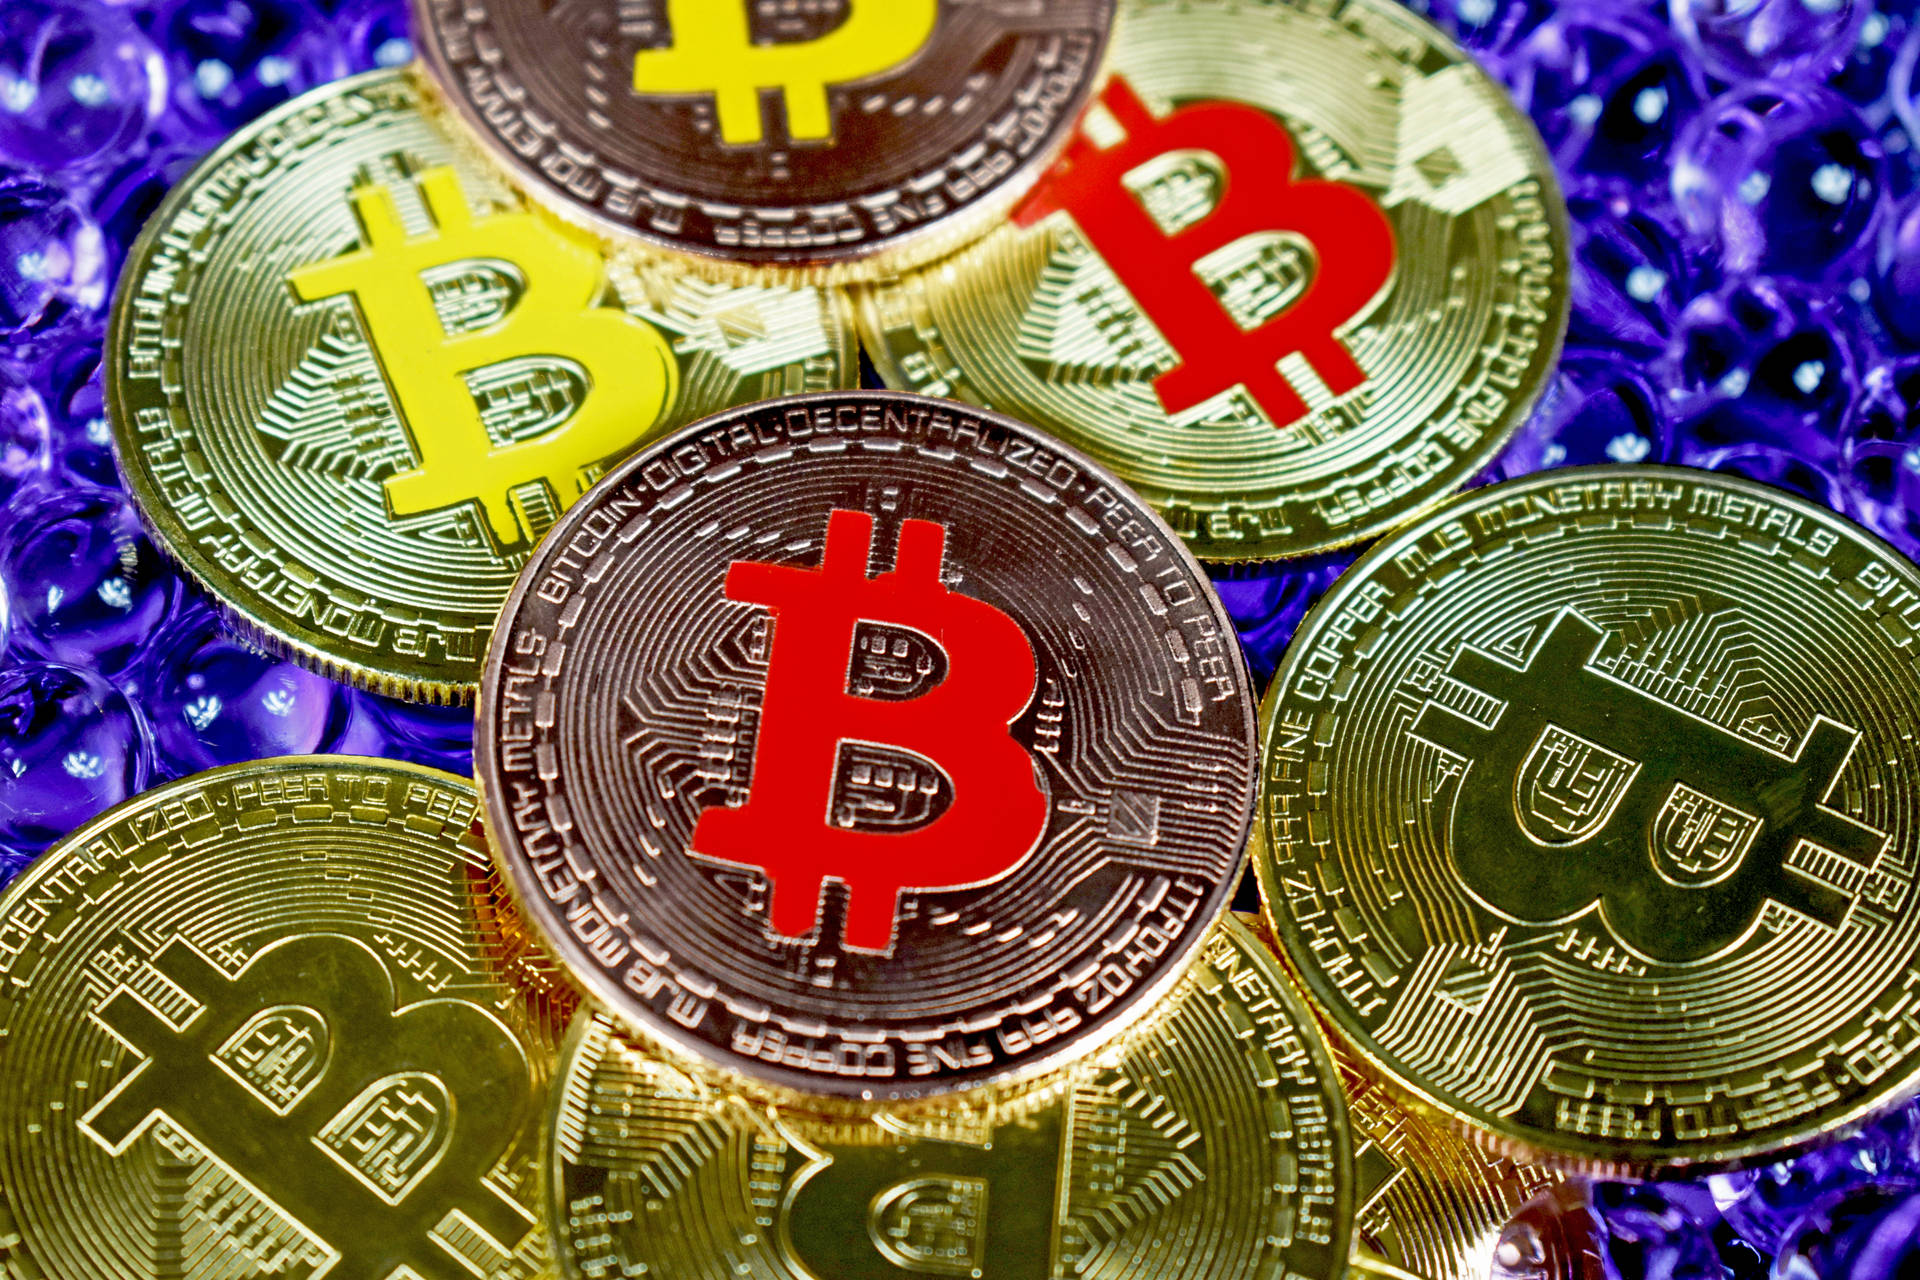 Colorful Embossed Bitcoin Tokens